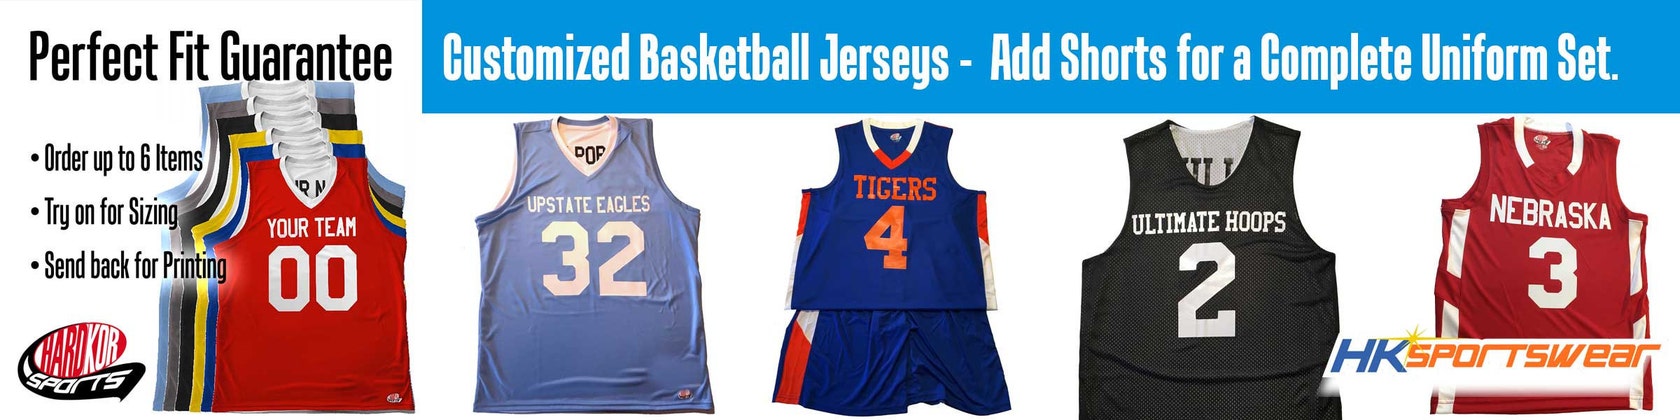 HKsportswear Custom Basketball Jerseys - Athletic Gold & White Home and Away - Old School Style - Includes Team Name, Player Name and Player Number